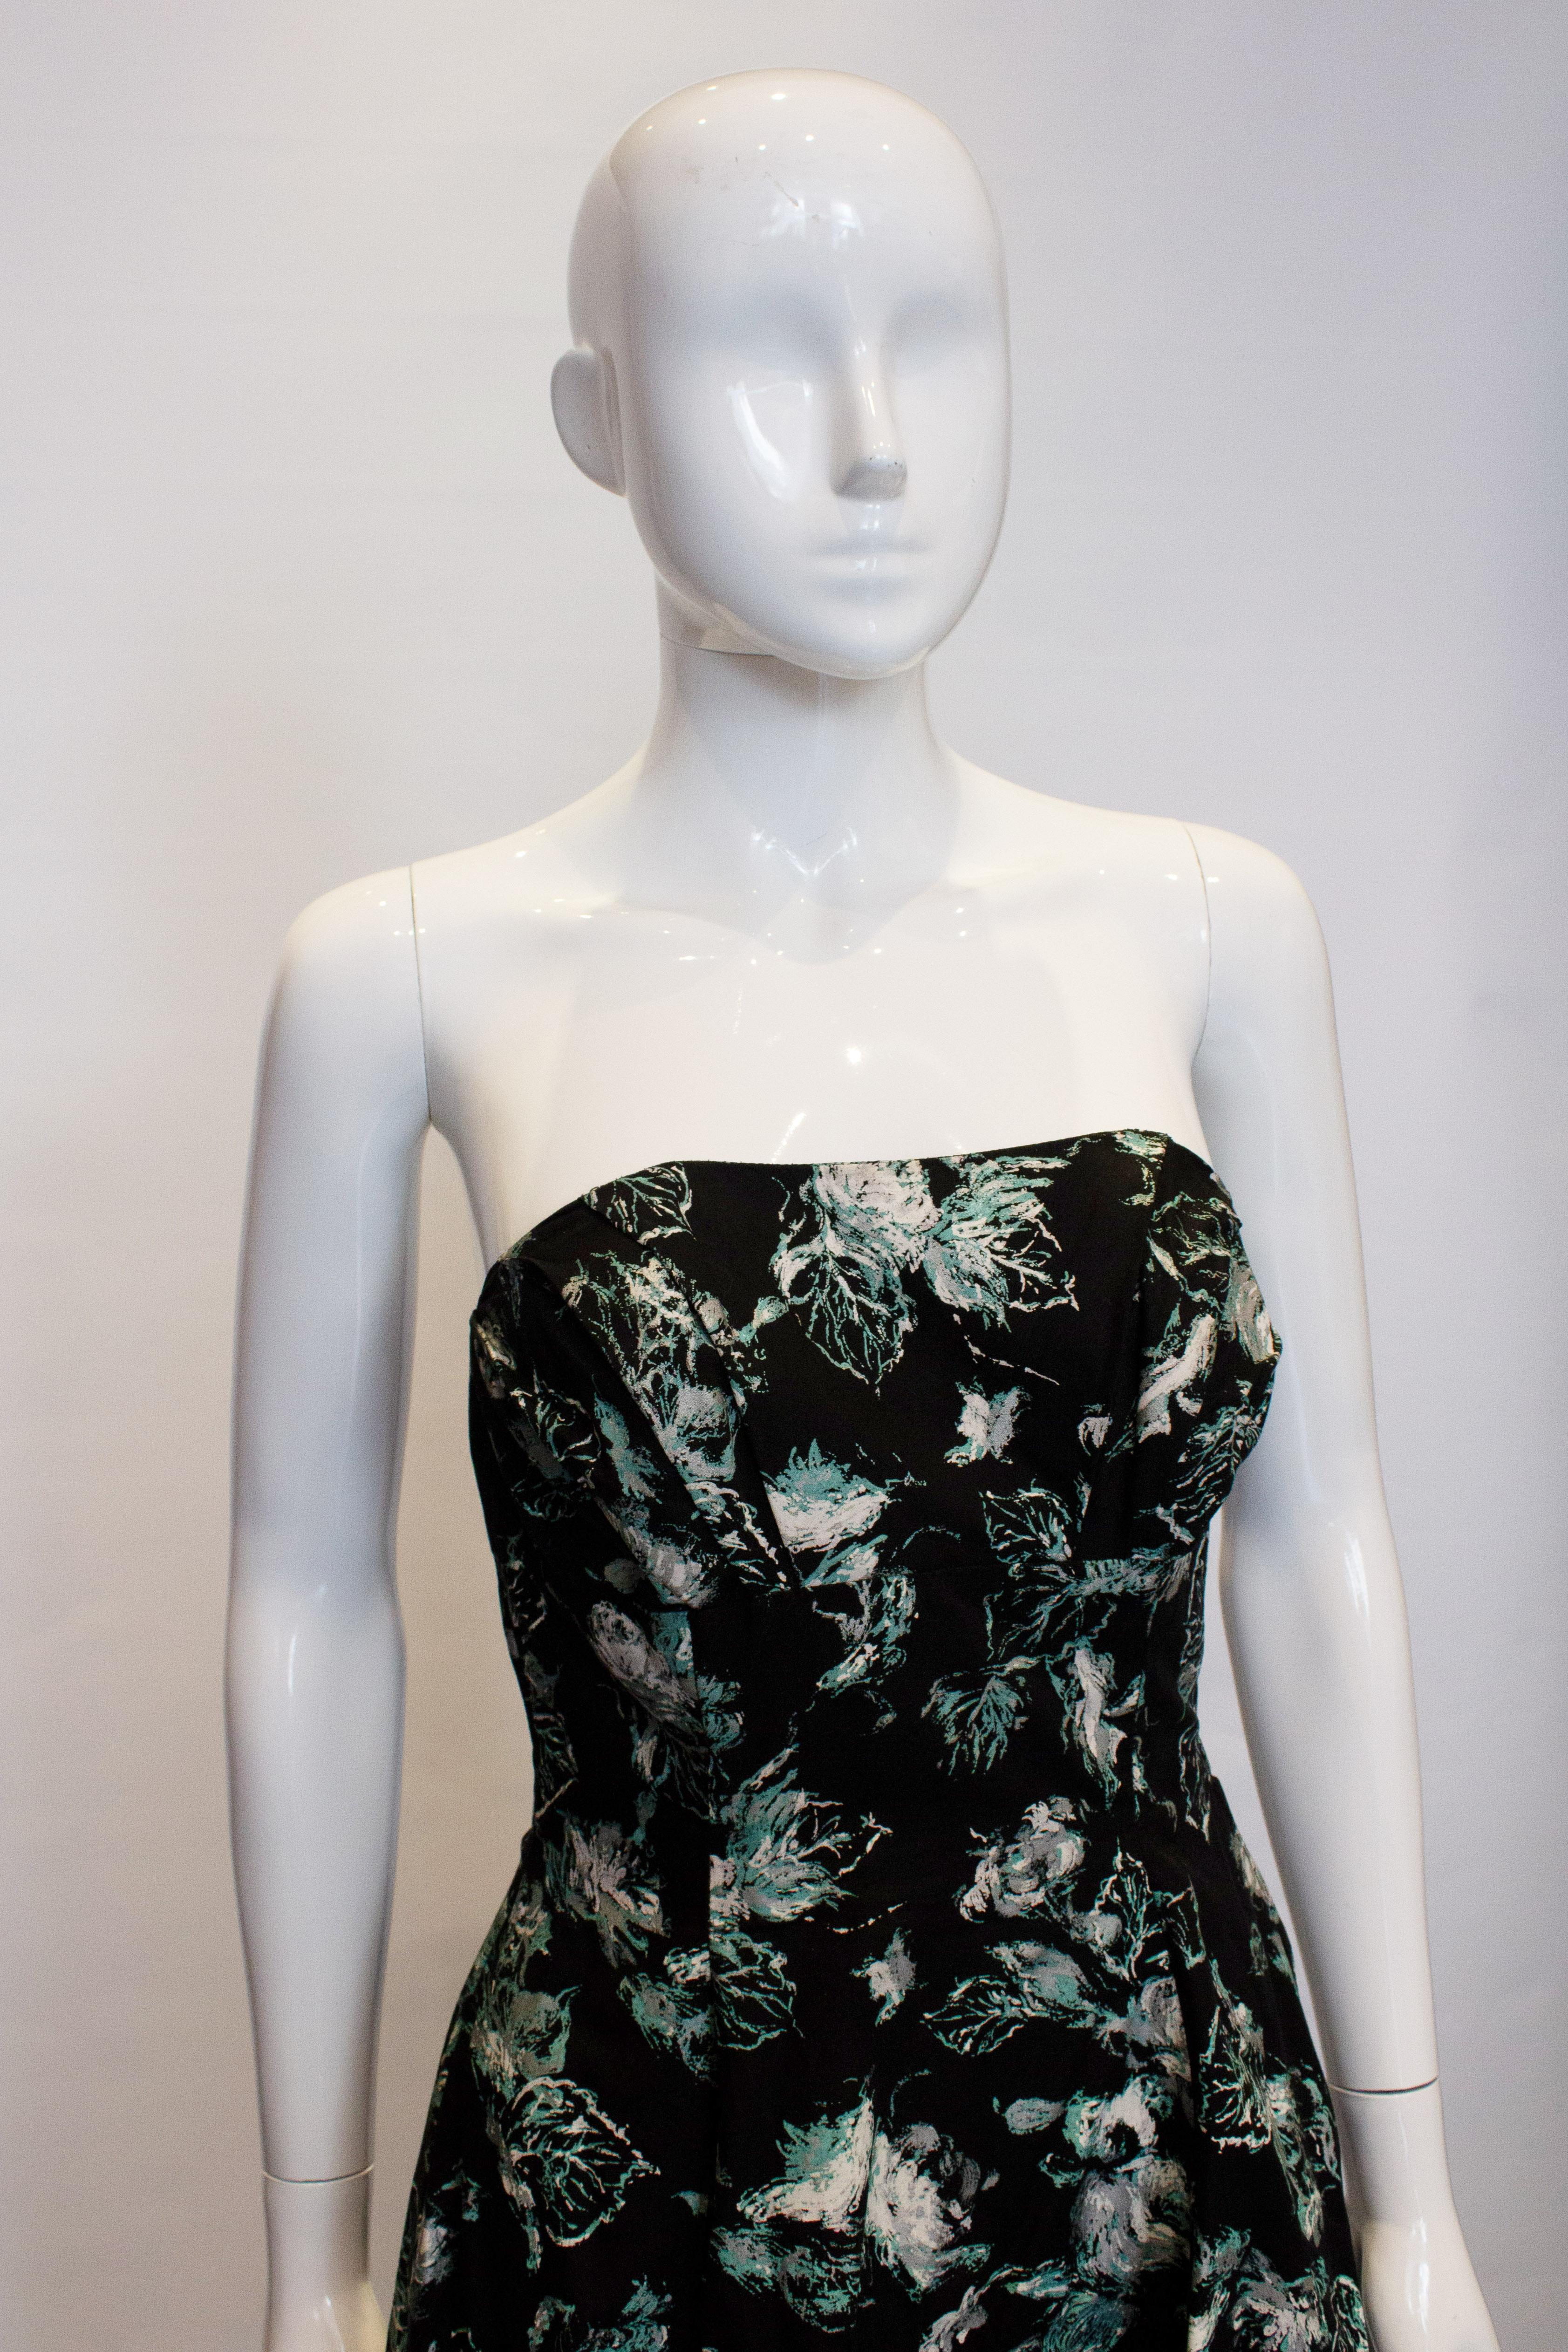 A fun vintage dress in a wonderful print of black, green, ivory and silver.
The dress is strapless, with boning in the bodice and a side zip opening.
Measurements: Bust 33'', waist 27'', length 38''